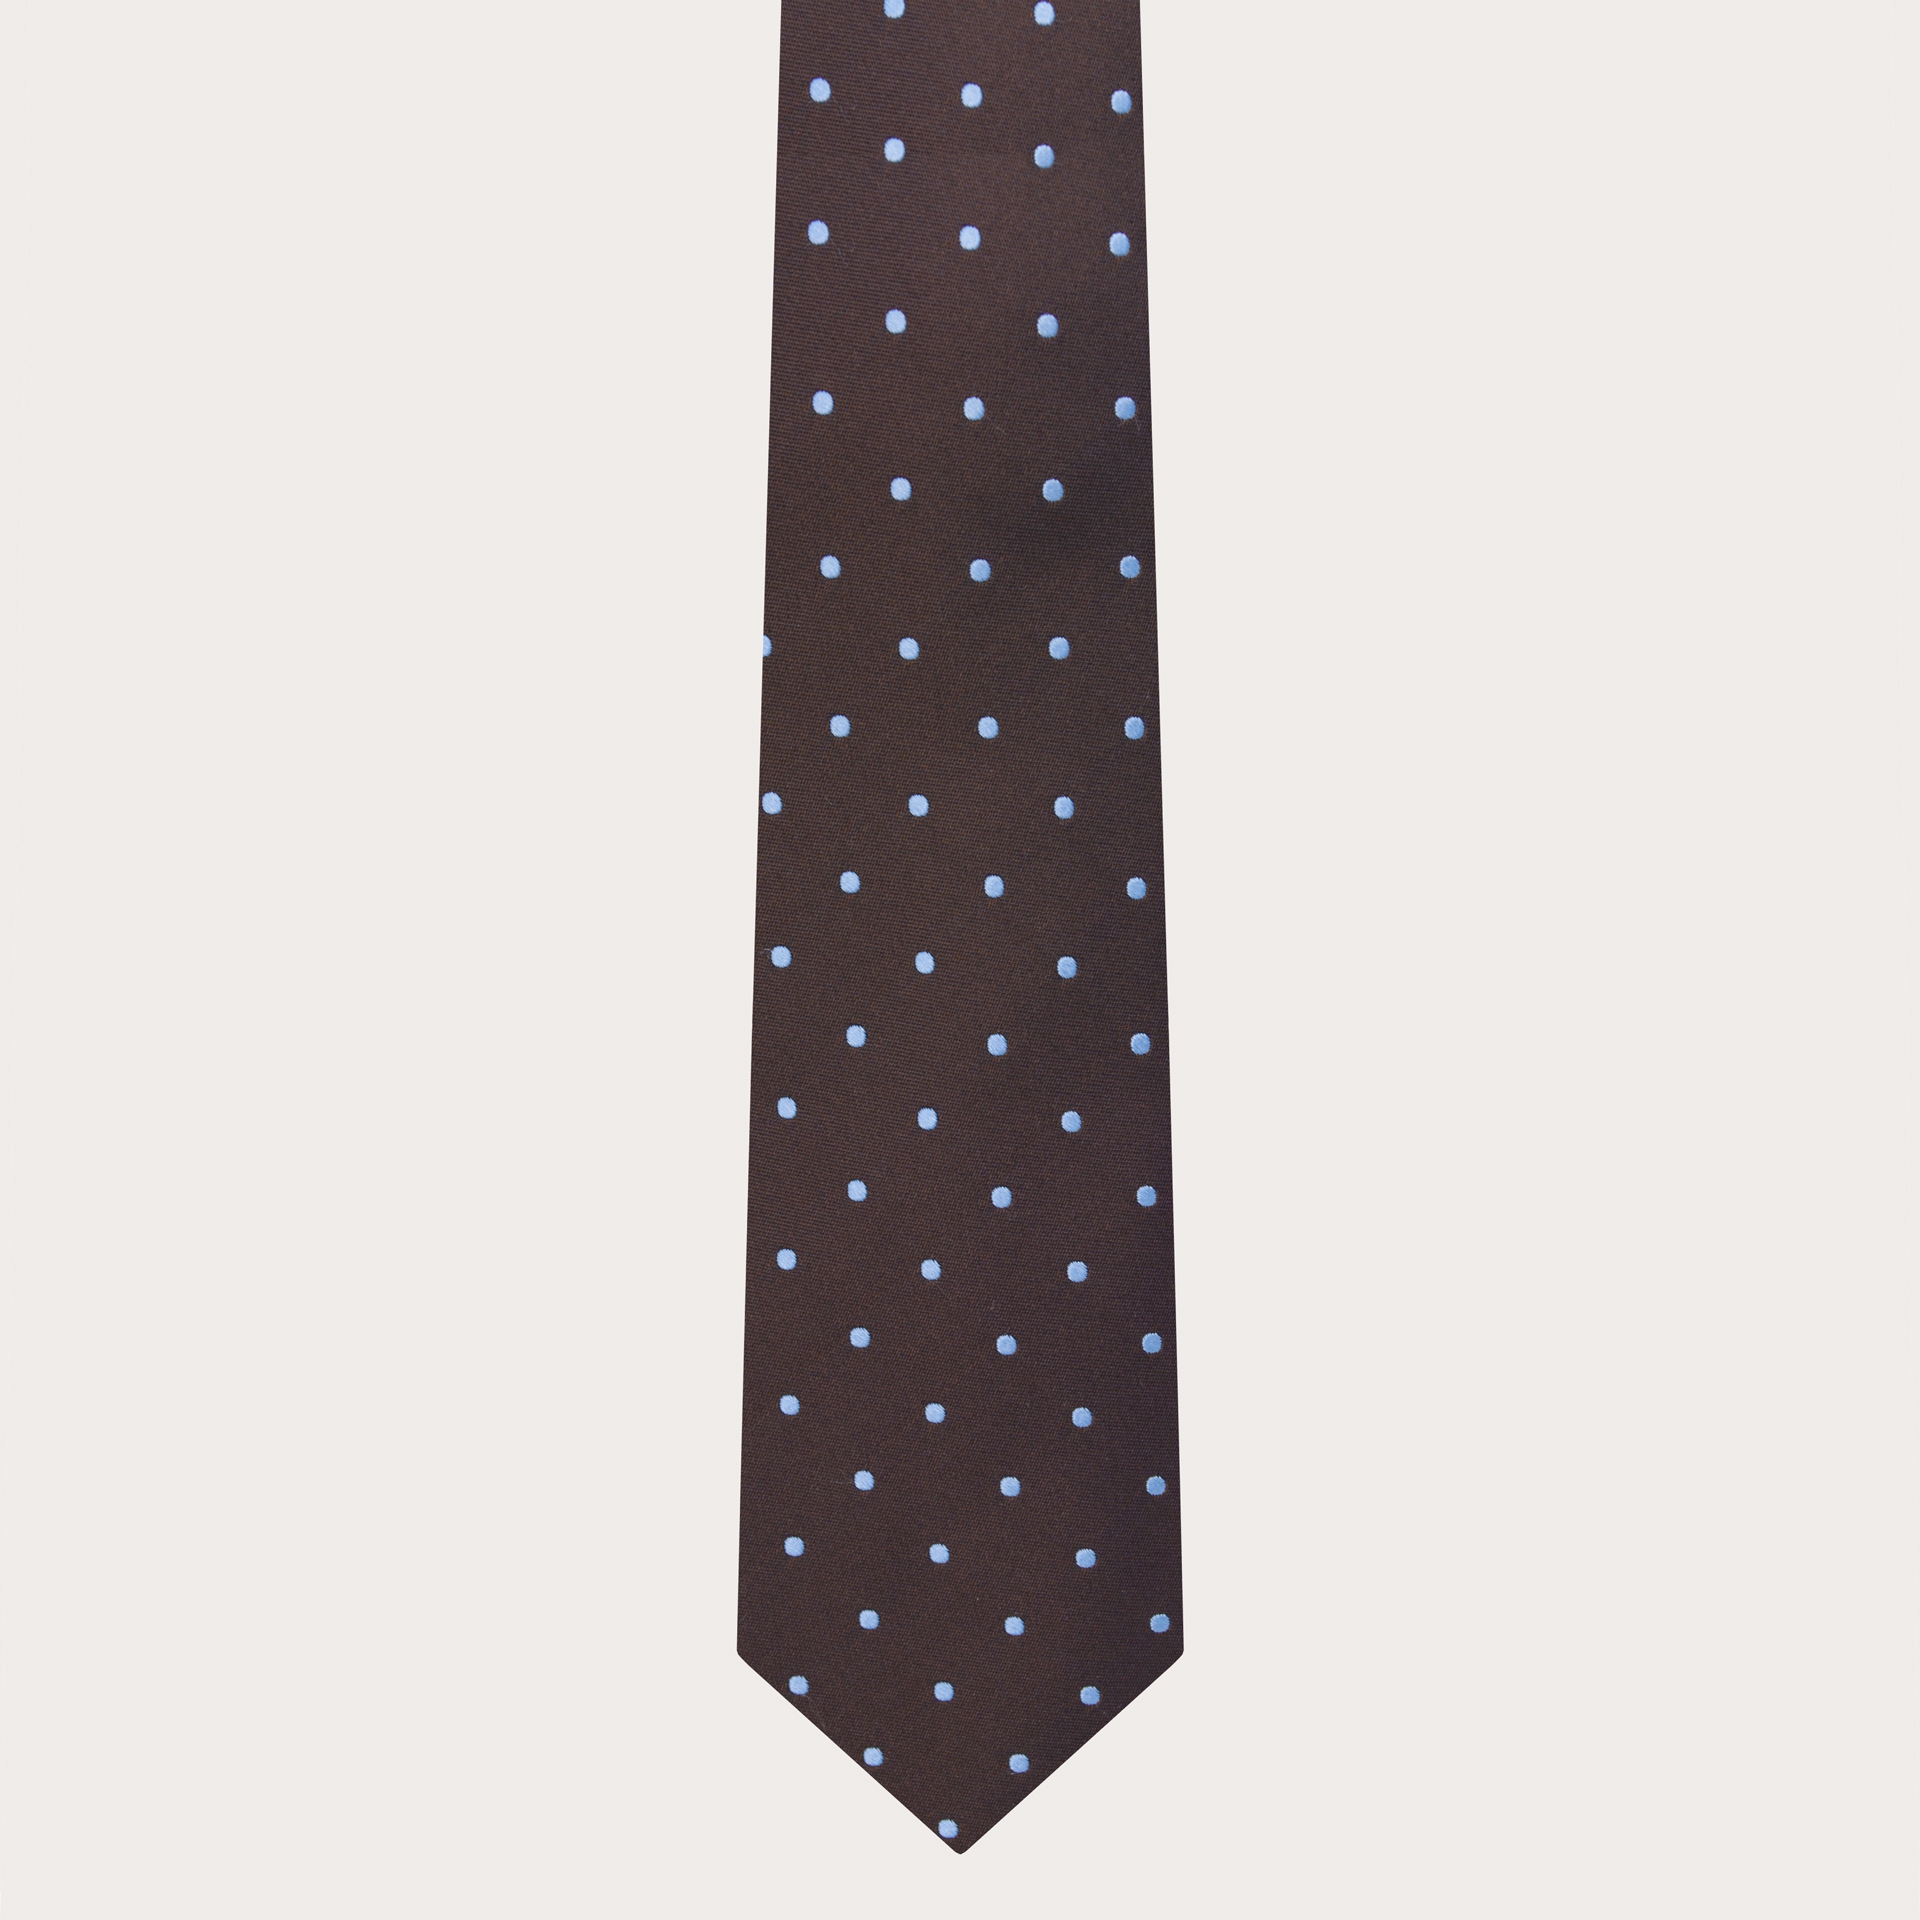 BRUCLE Elegant brown necktie with light blue dotted pattern